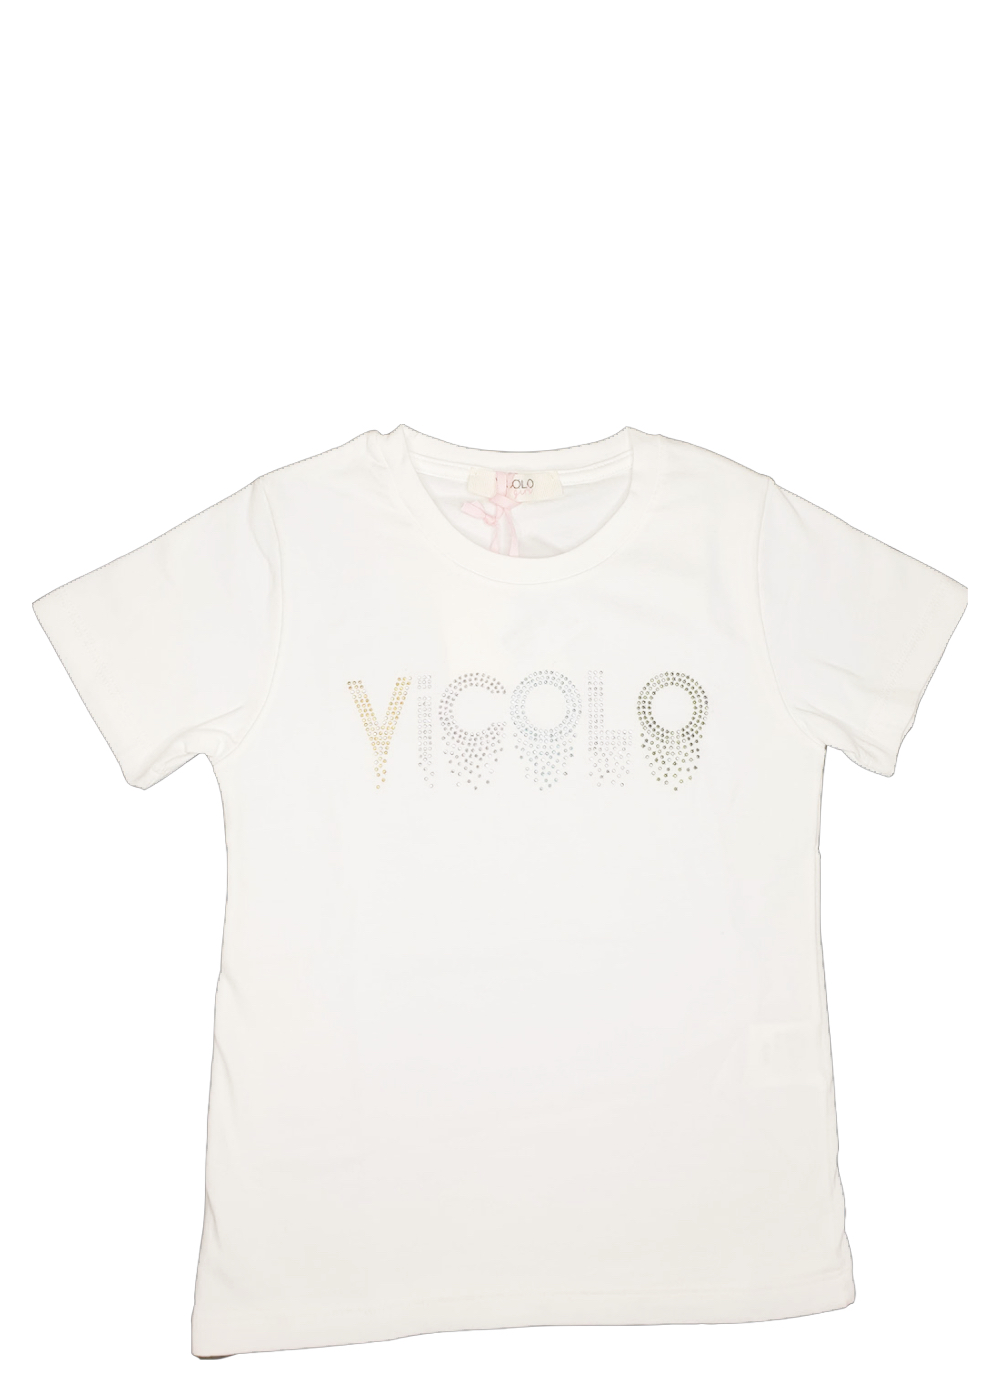 Featured image for “VICOLO T-SHIRT GLITTER”